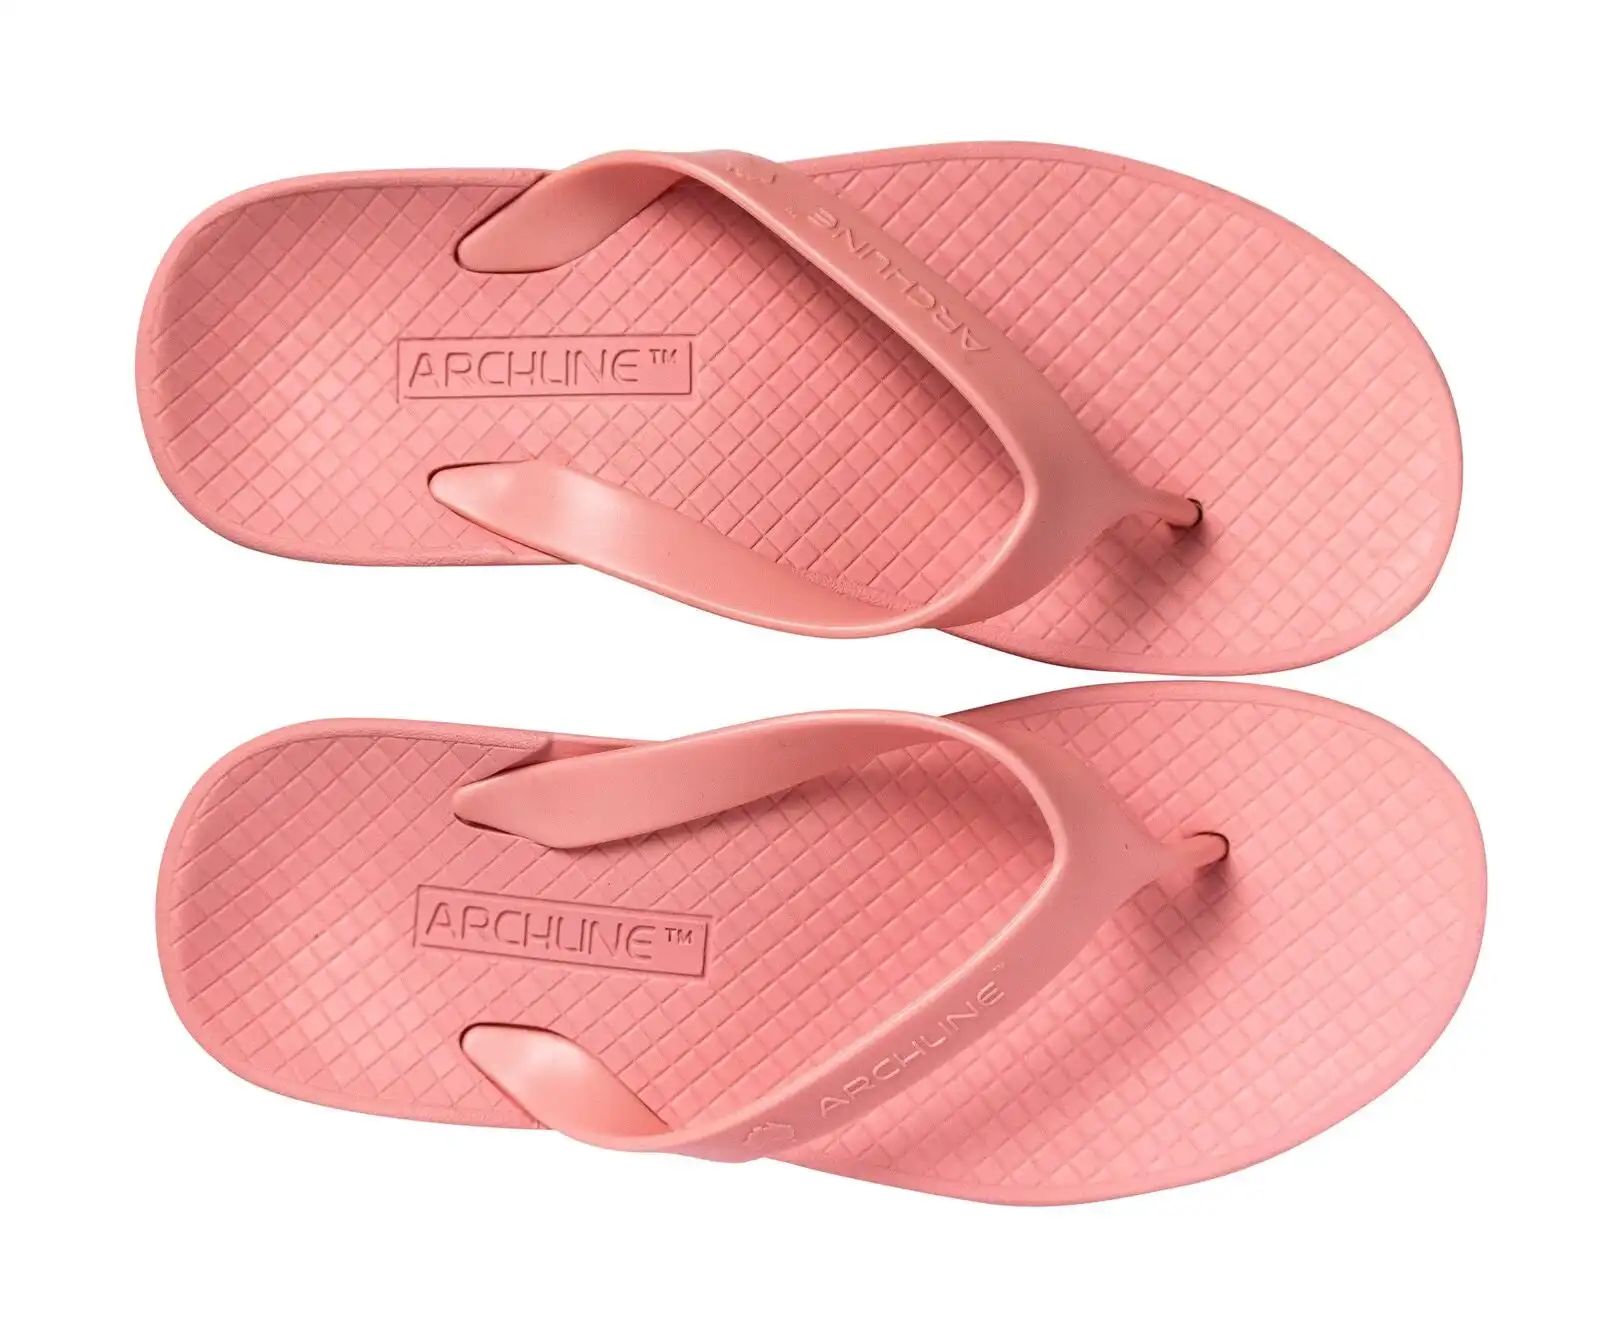 Archline Orthotic Thongs Arch Support Shoes Medical Footwear Flip Flops - Coral Pink